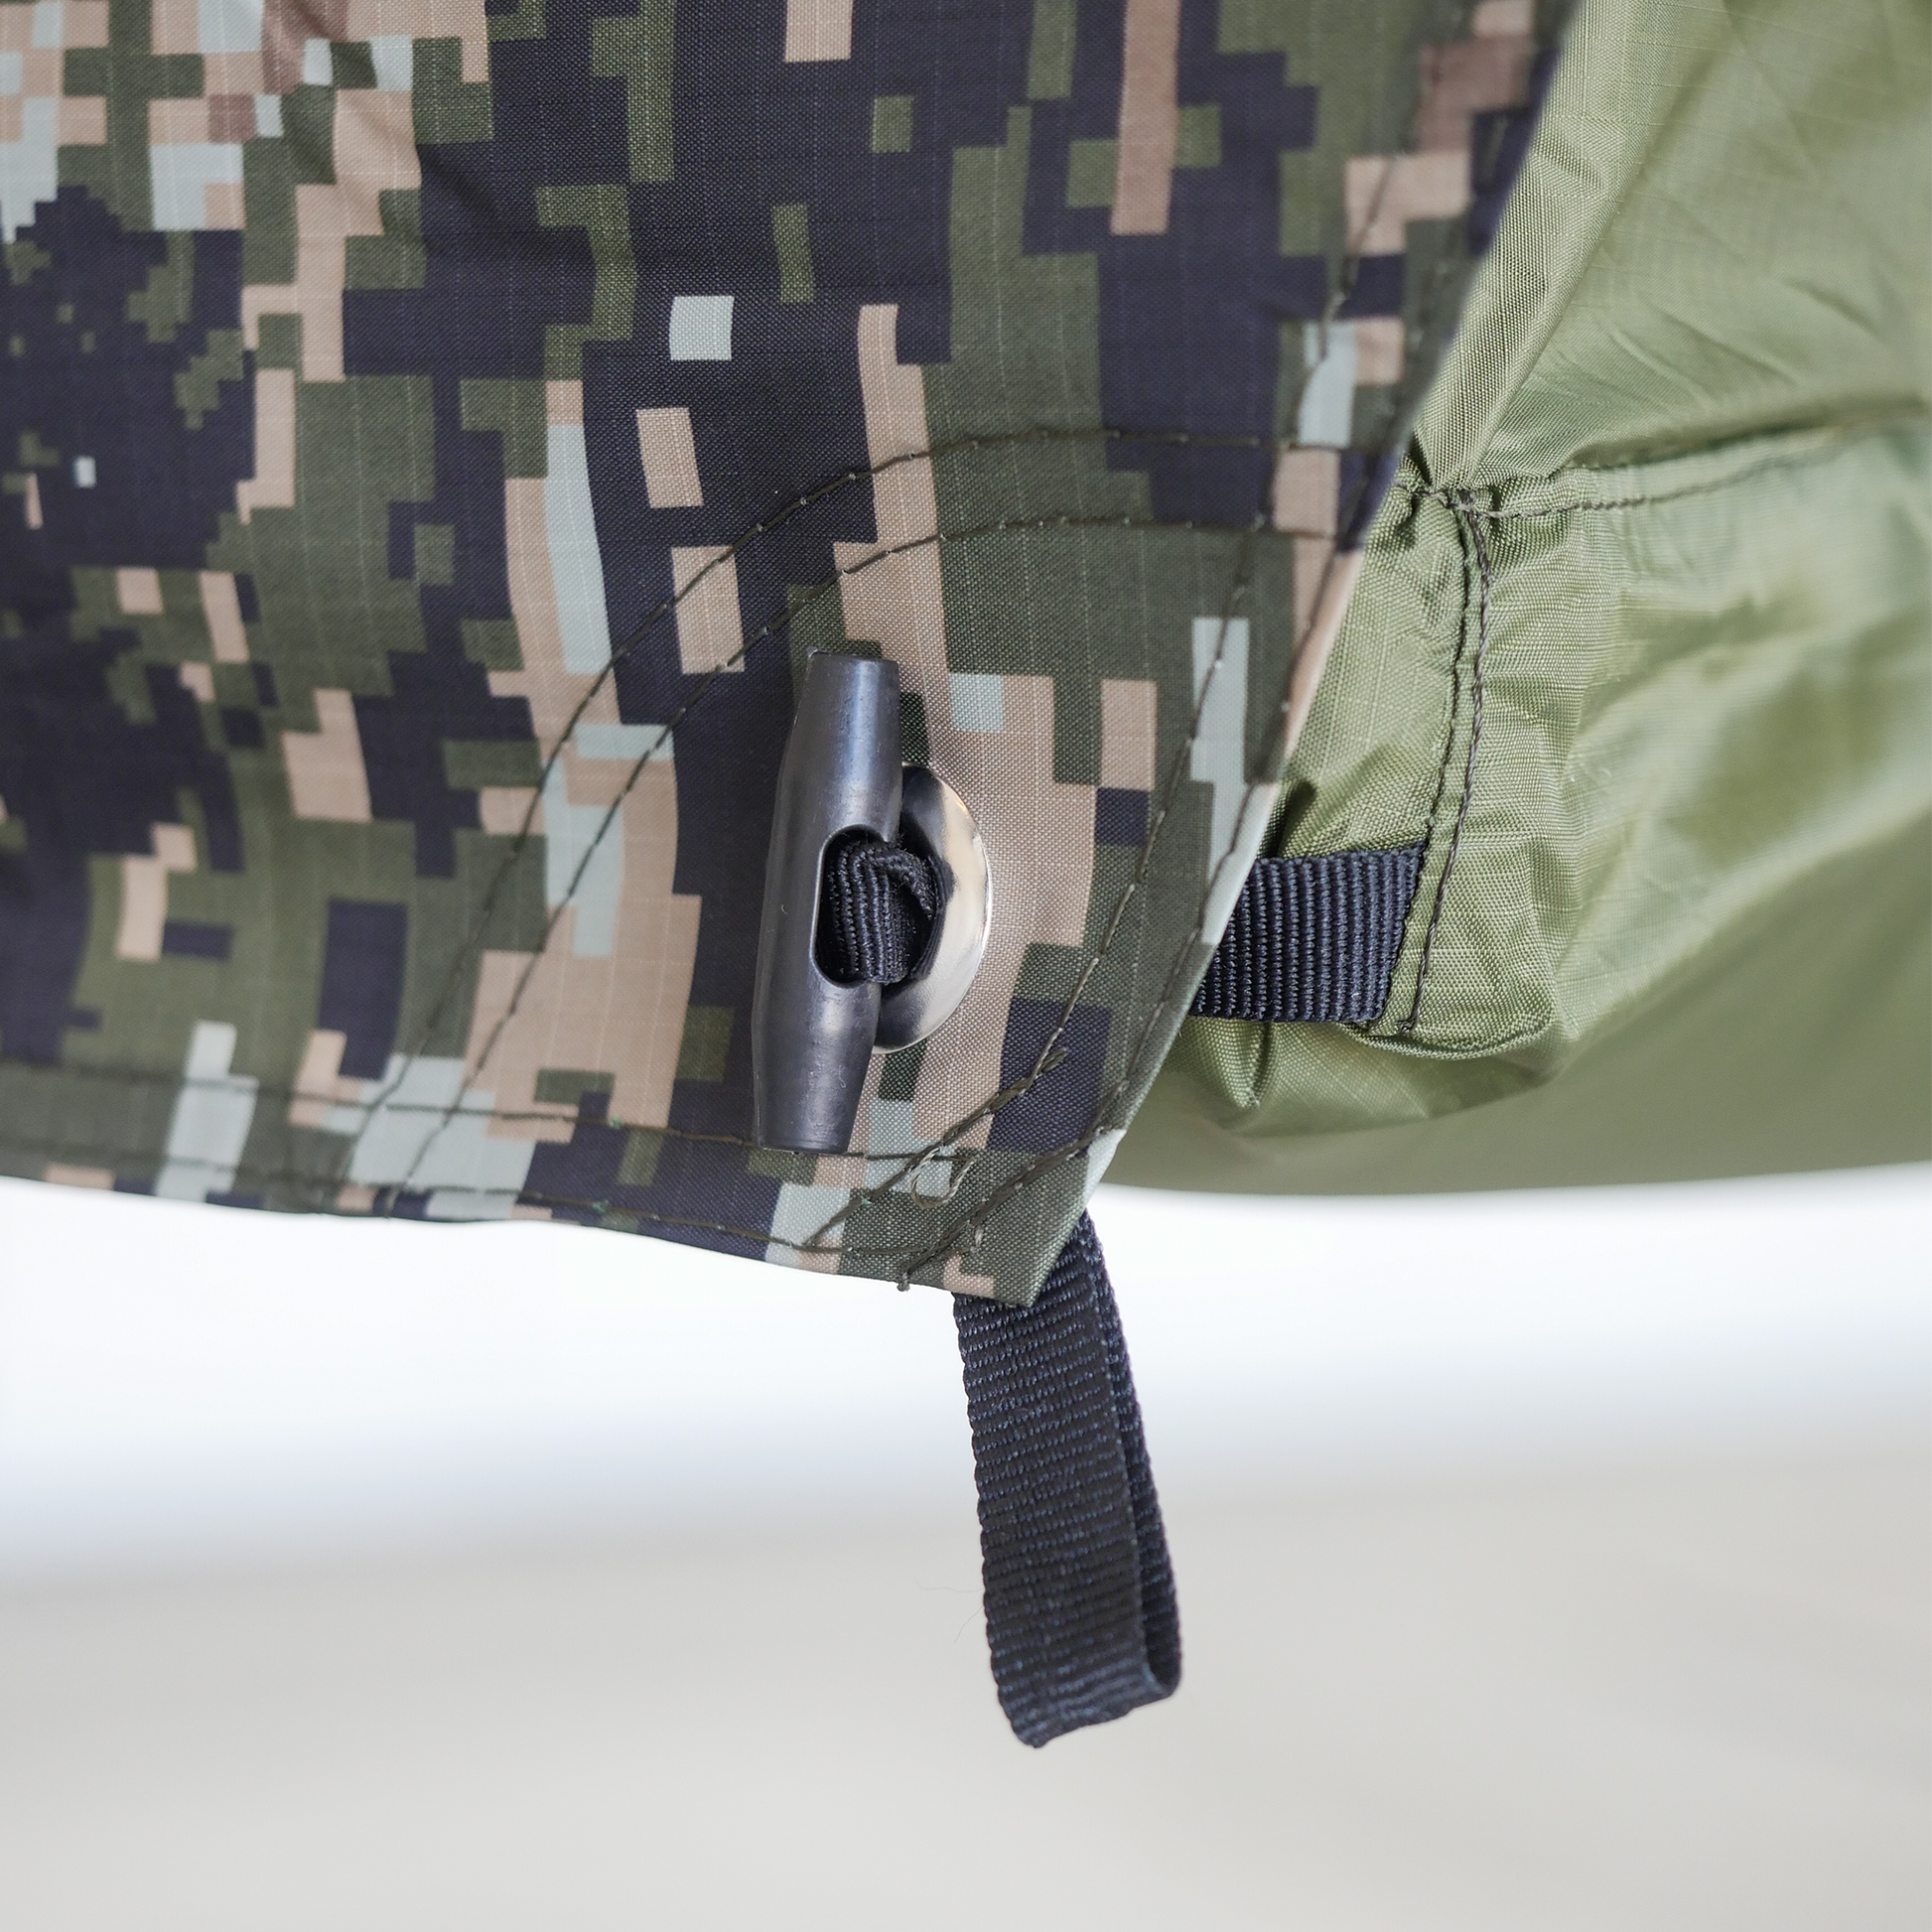 Camping hammock camouflage rainfly details